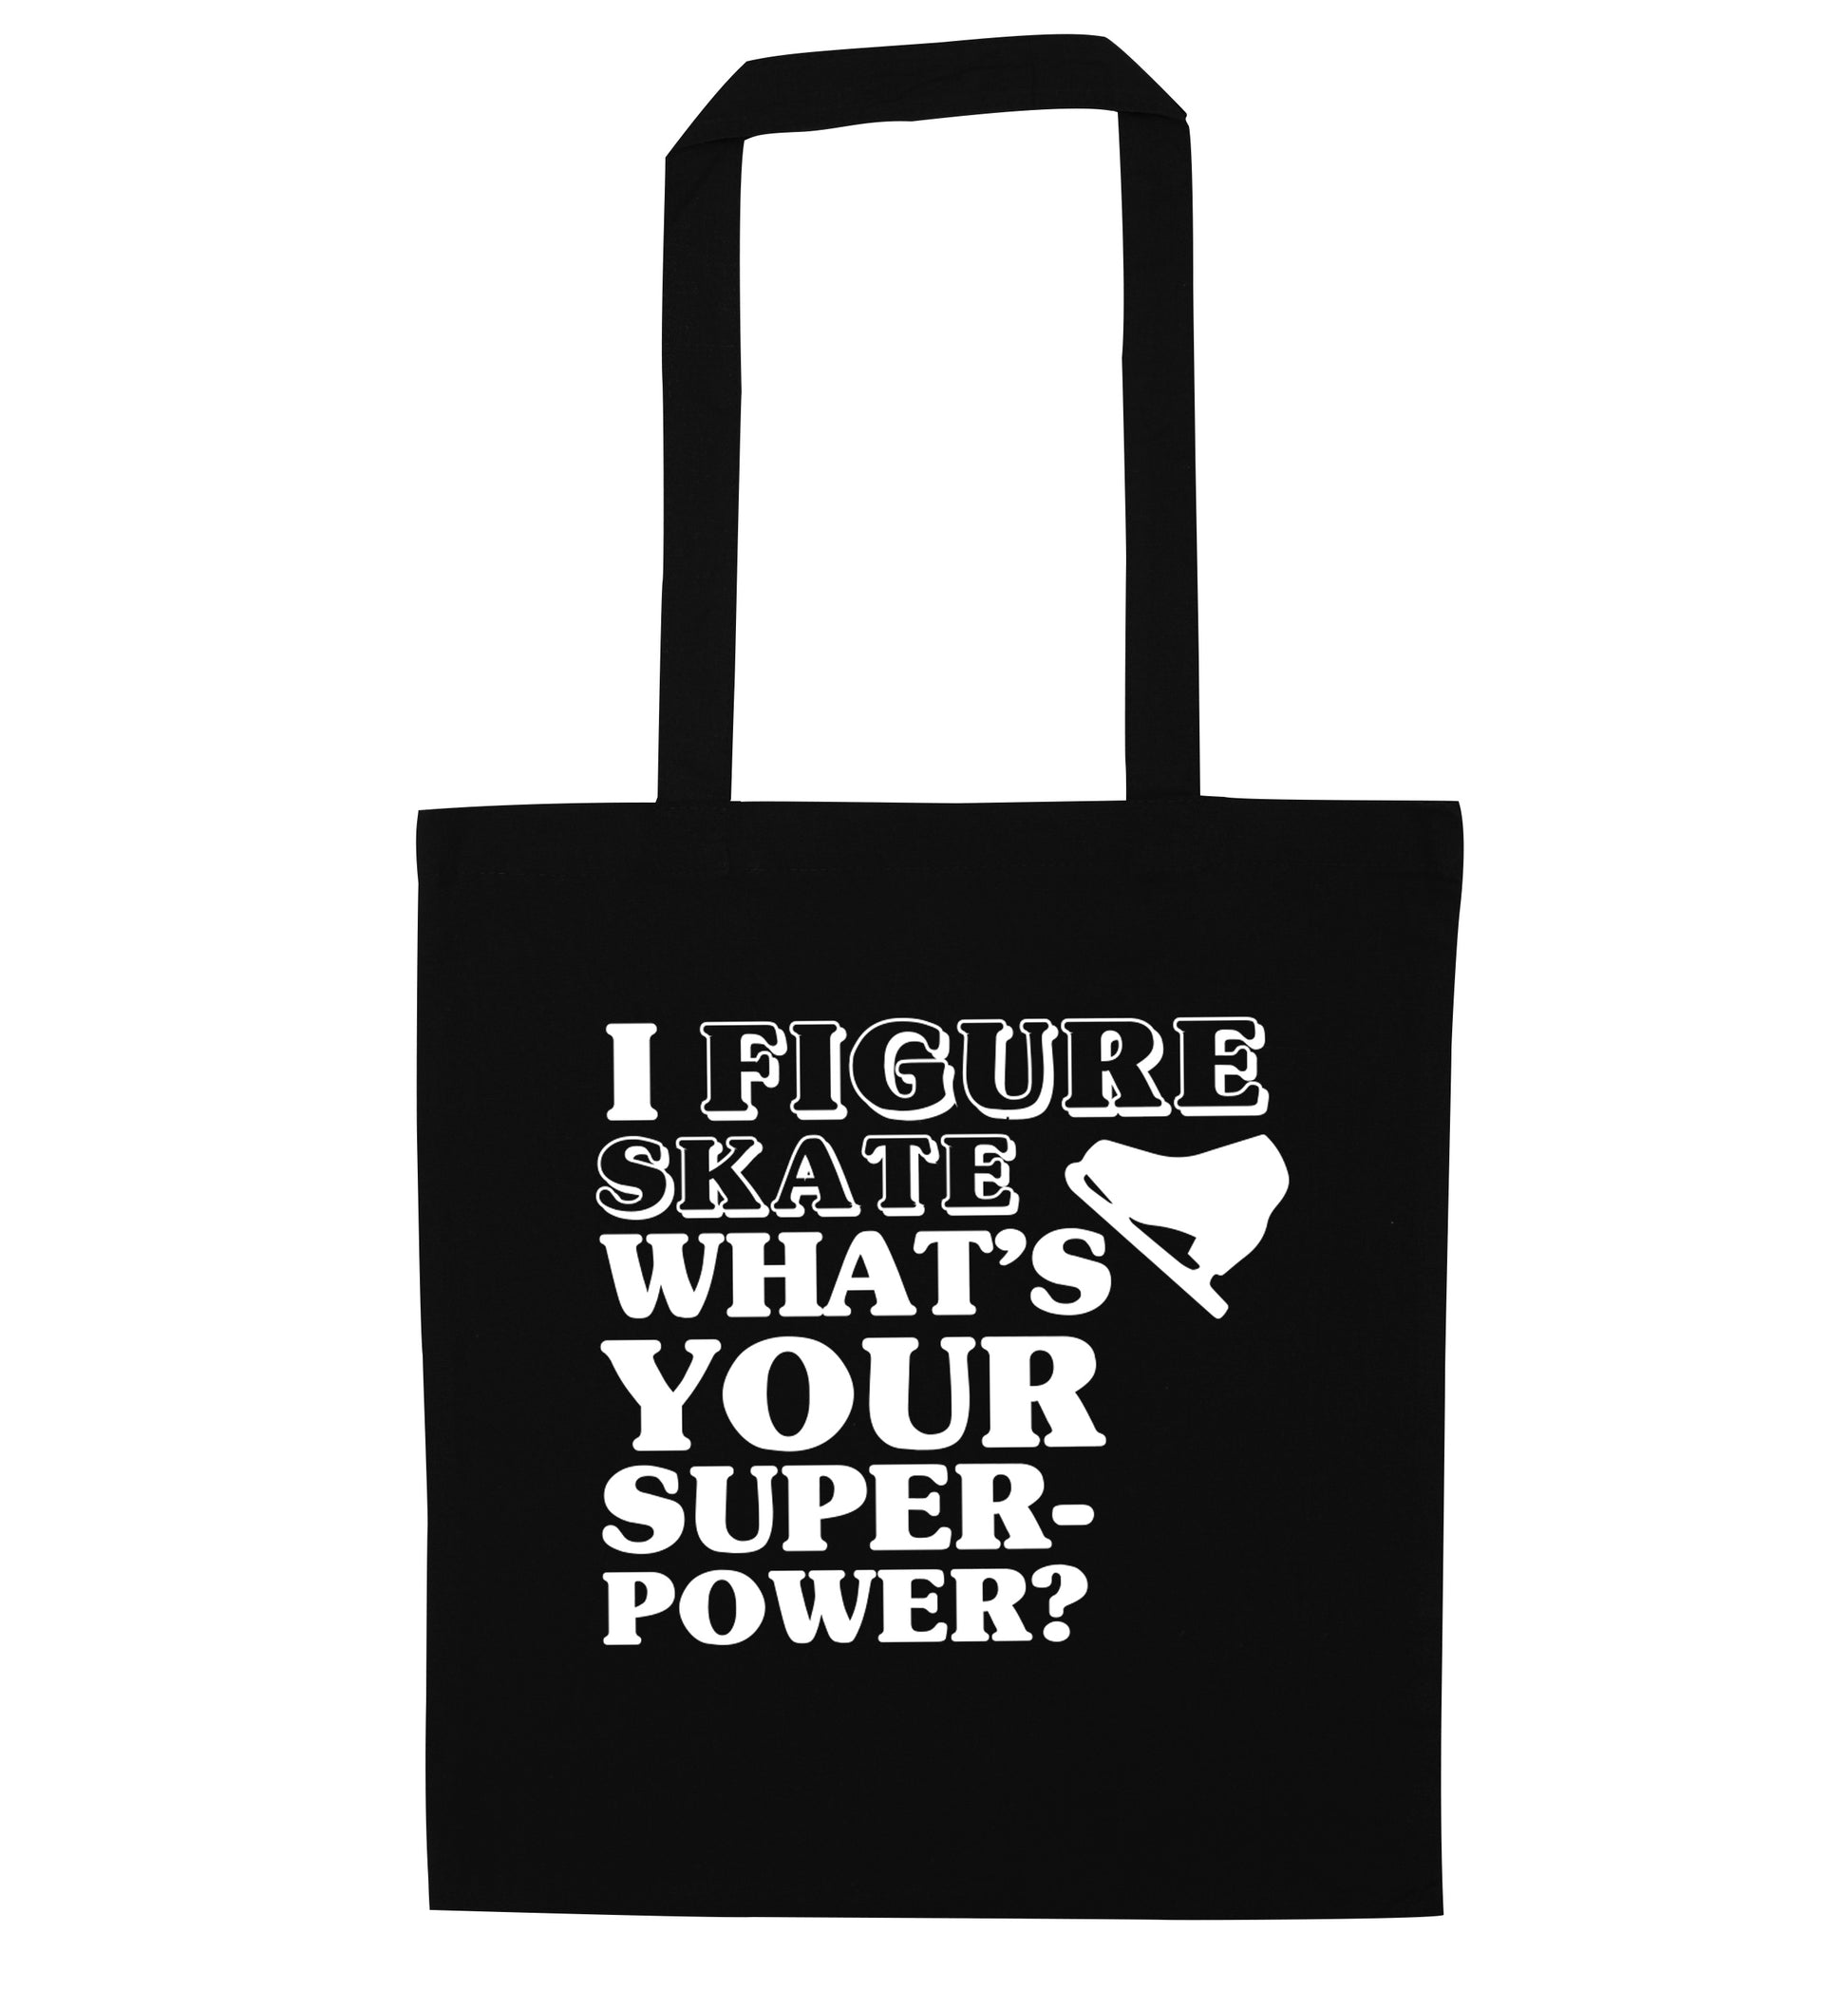 I figure skate what's your superpower? black tote bag